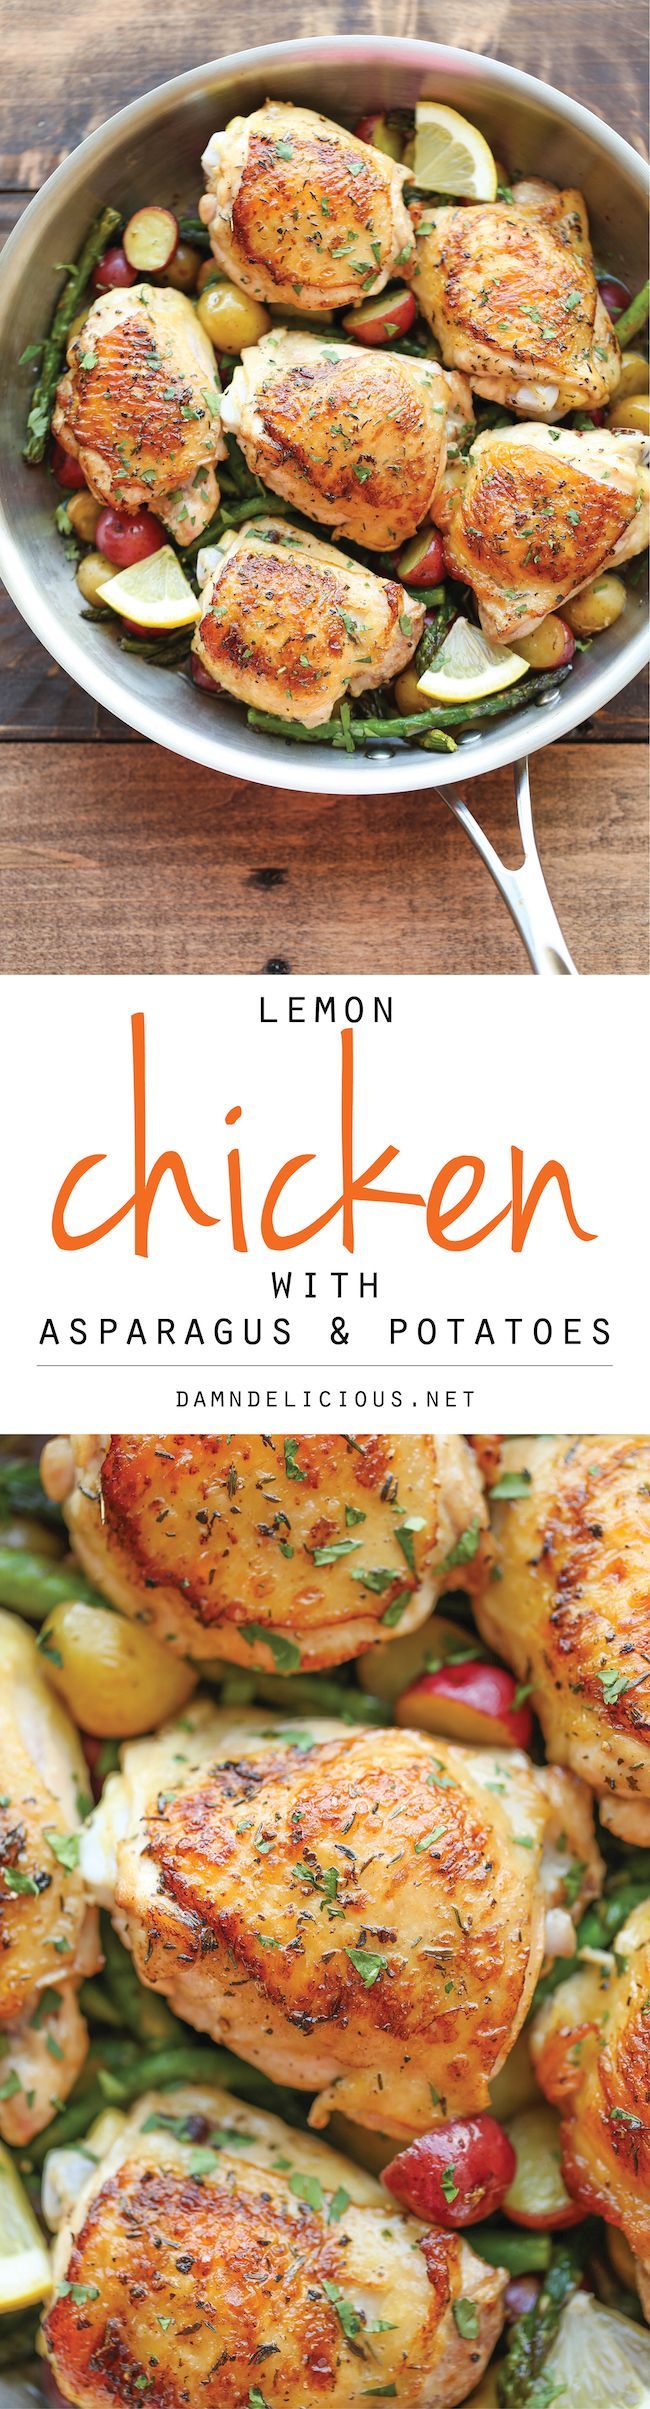 Lemon Chicken with Asparagus and Potatoes – Crisp-tender chicken baked to absolute perfection. It’s truly an entire meal in a